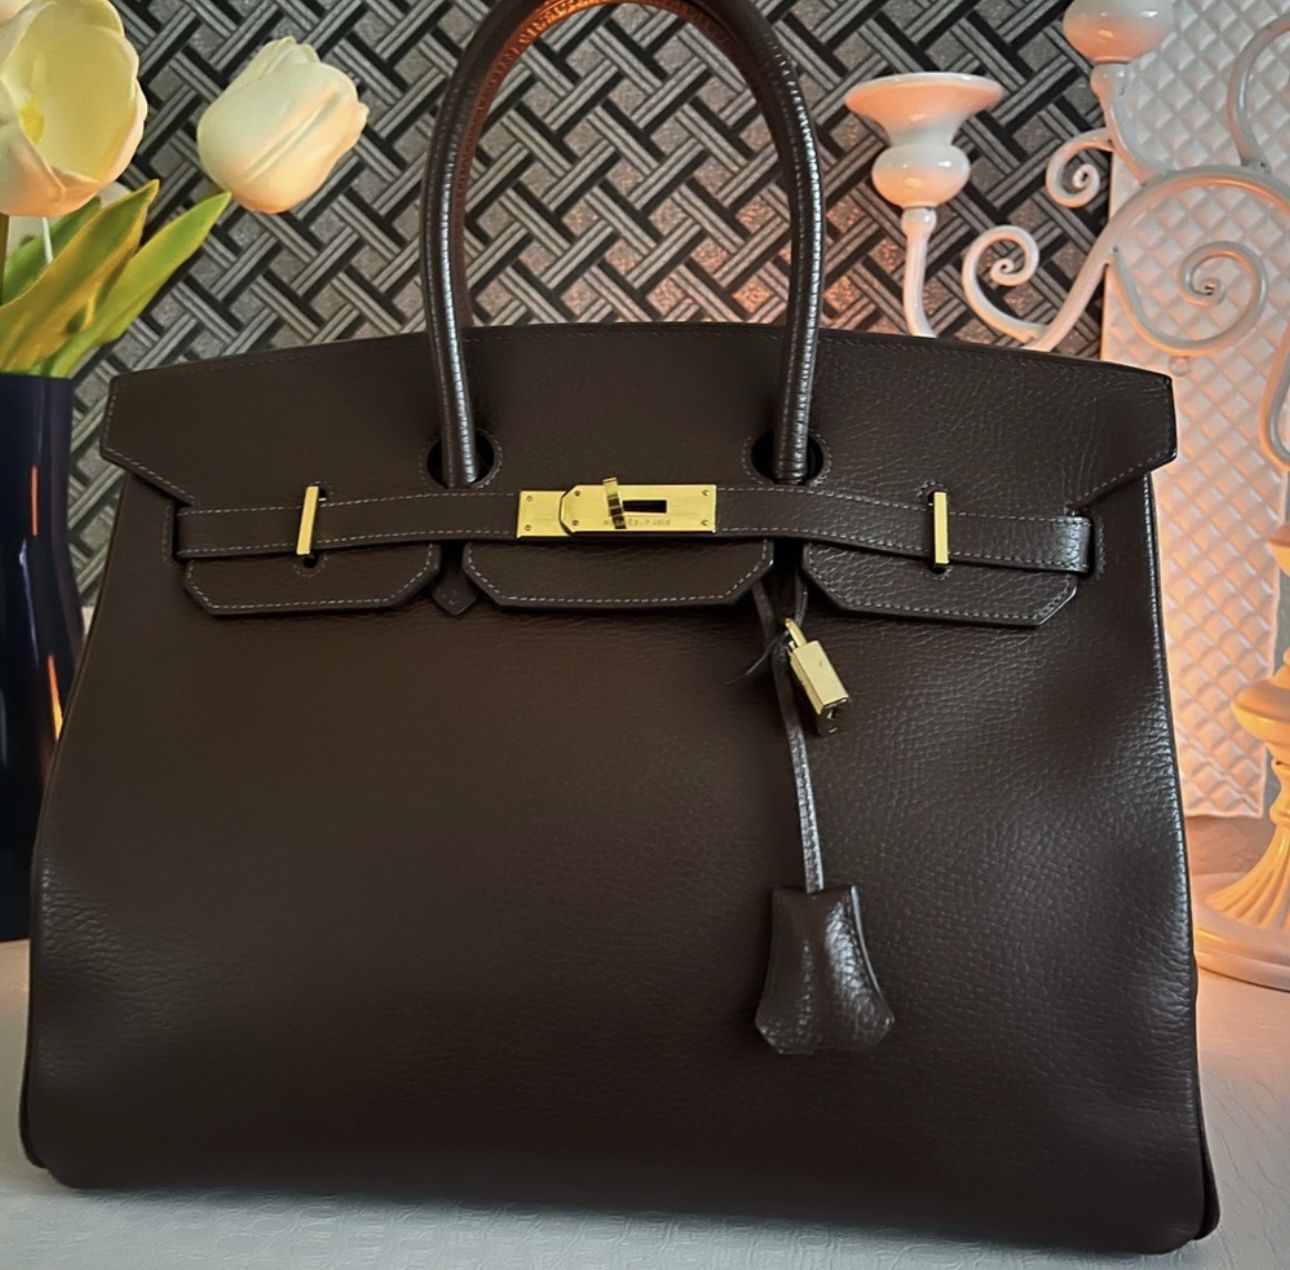 Hermes Birkin Bags 35 Not Used for Sale in Miami Beach, FL - OfferUp